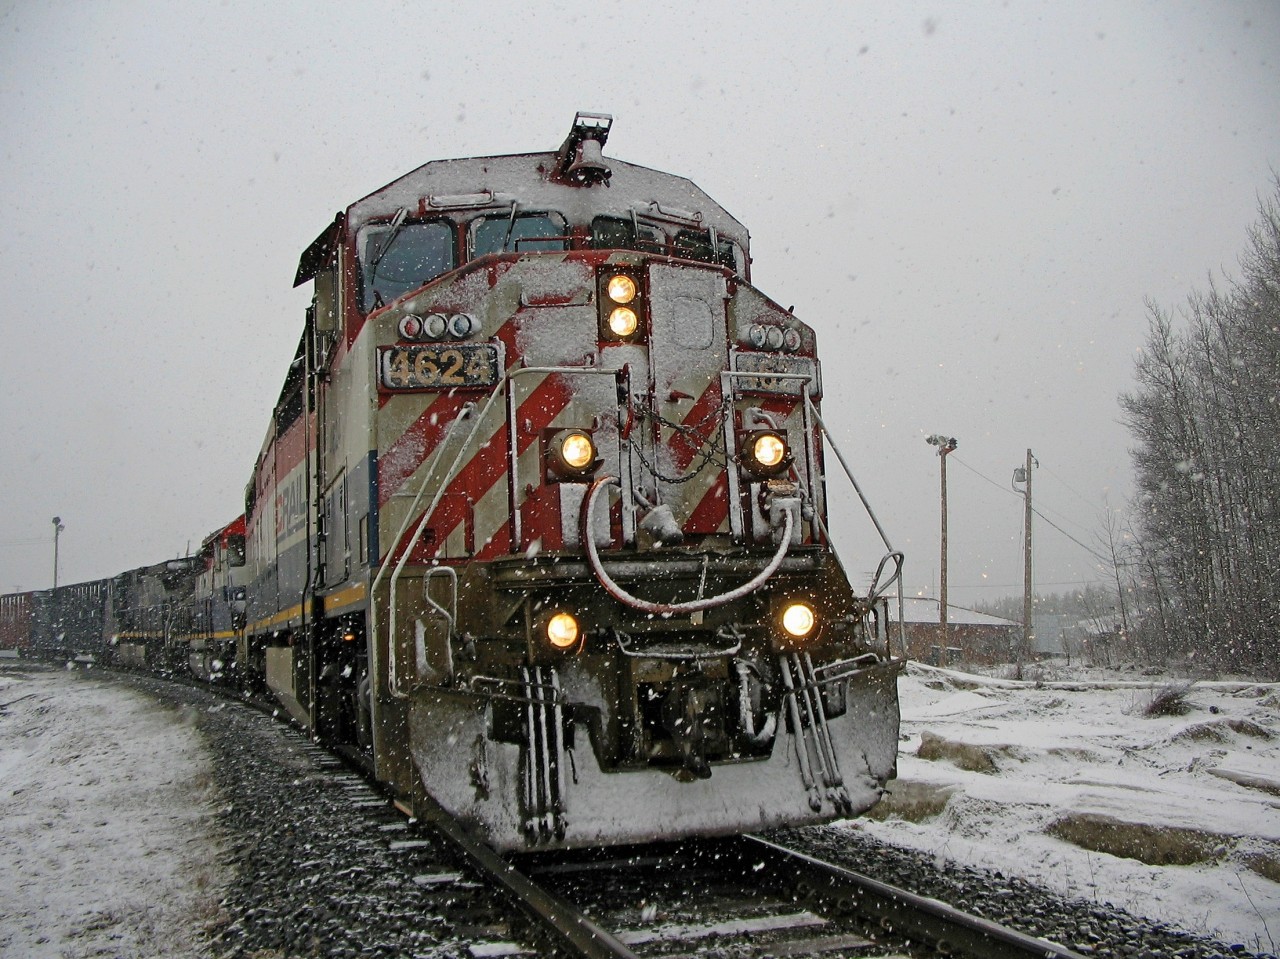 Oddly, I had the 4624 leading 13 years prior to the day that James Knott captured 4624 on the way to the scrap yard in Welland. http://www.railpictures.ca/?attachment_id=45076
We were switching the lumber mill at Dunkley, BC and a nasty snow squall blew through the area. I had a few minutes for photos and then back into the nice dry warm cab.
At least 4624 had a nice sunny day for it's last trip even though it was the end of the line for that loco. Wonder who got the number boards and class lights ???